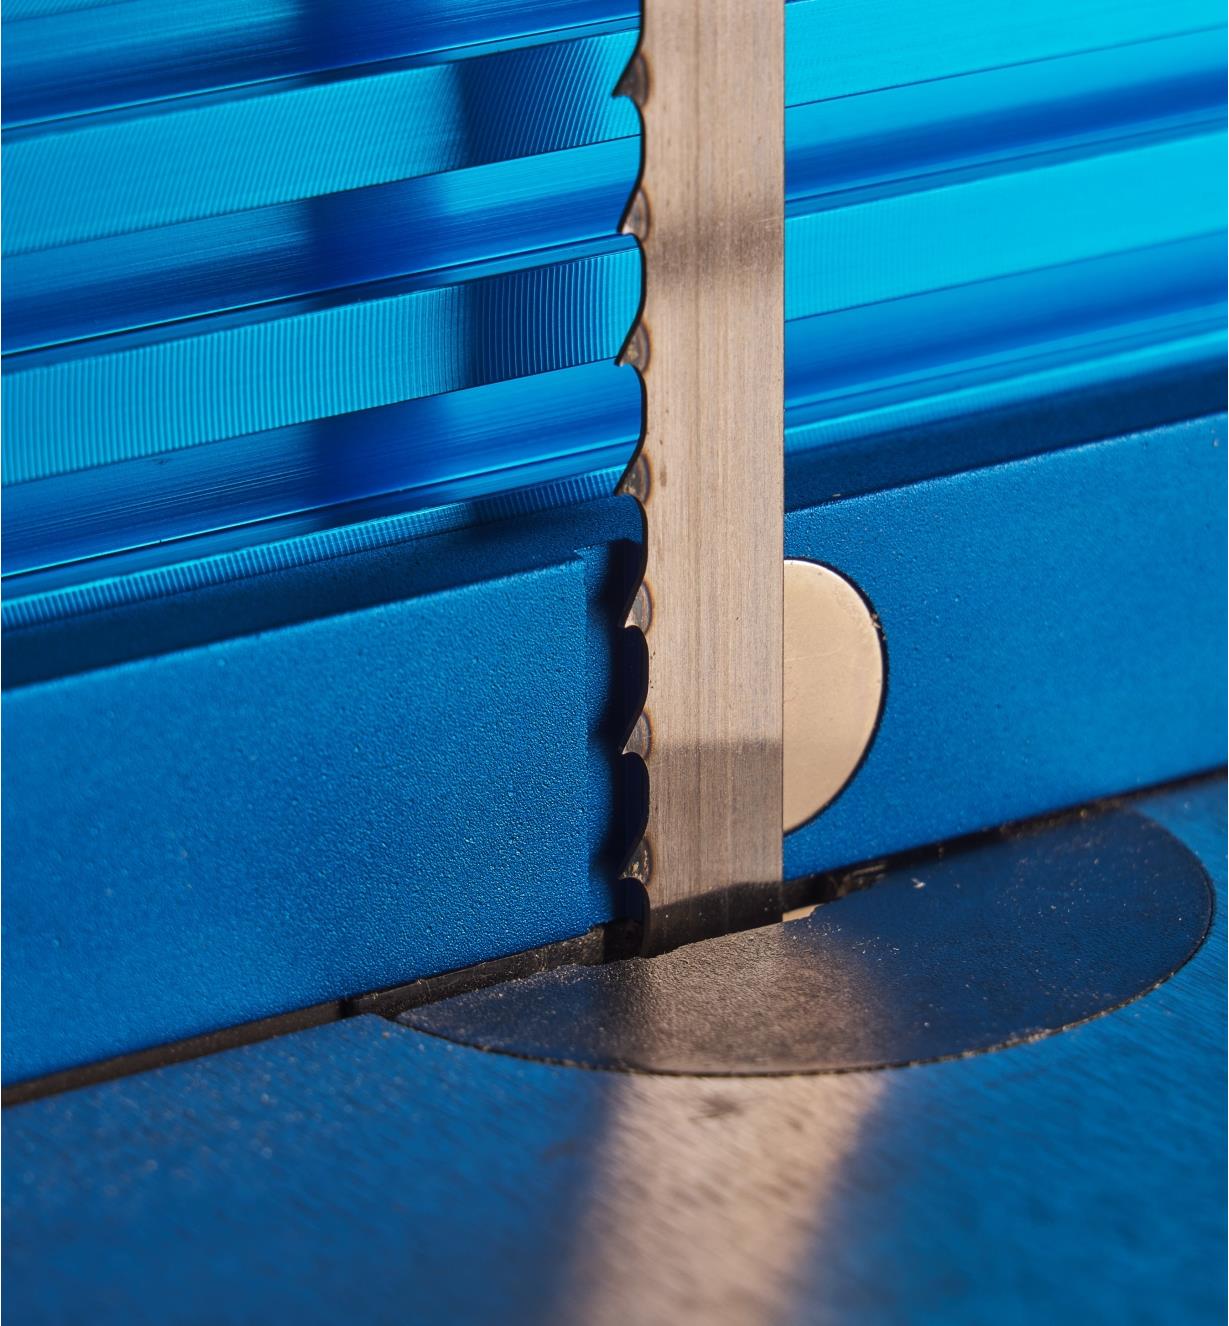 A F.A.S.T. fence magnetic block attached to a bandsaw blade